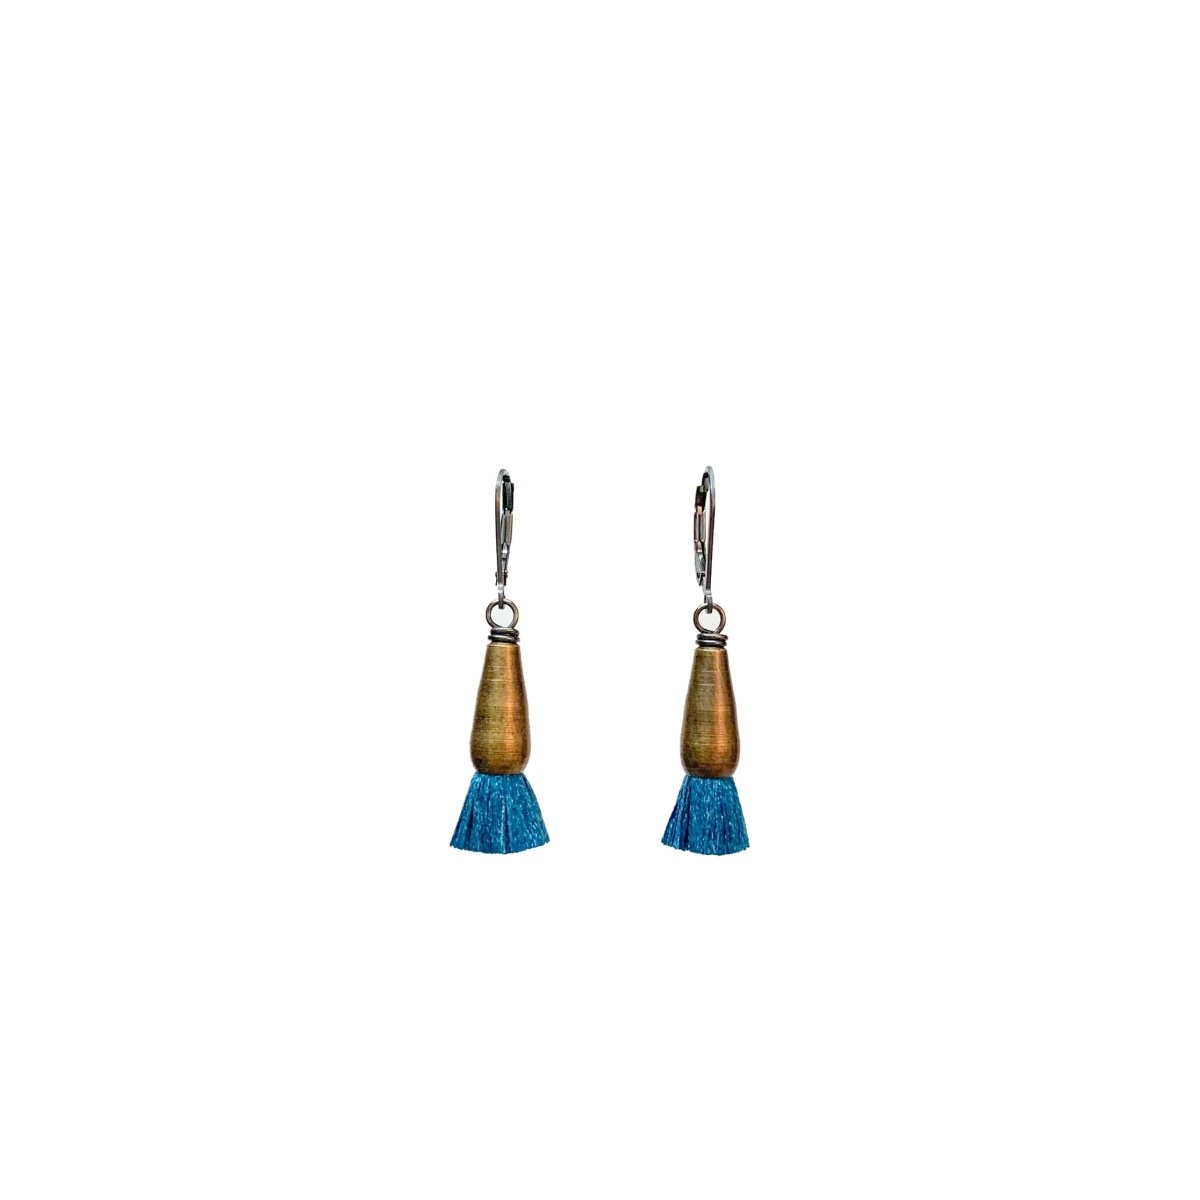 A pair of brass earrings finished with blue silk tassels. The Bud Earrings in Peacock are from designer Emily Bixler of BOET.